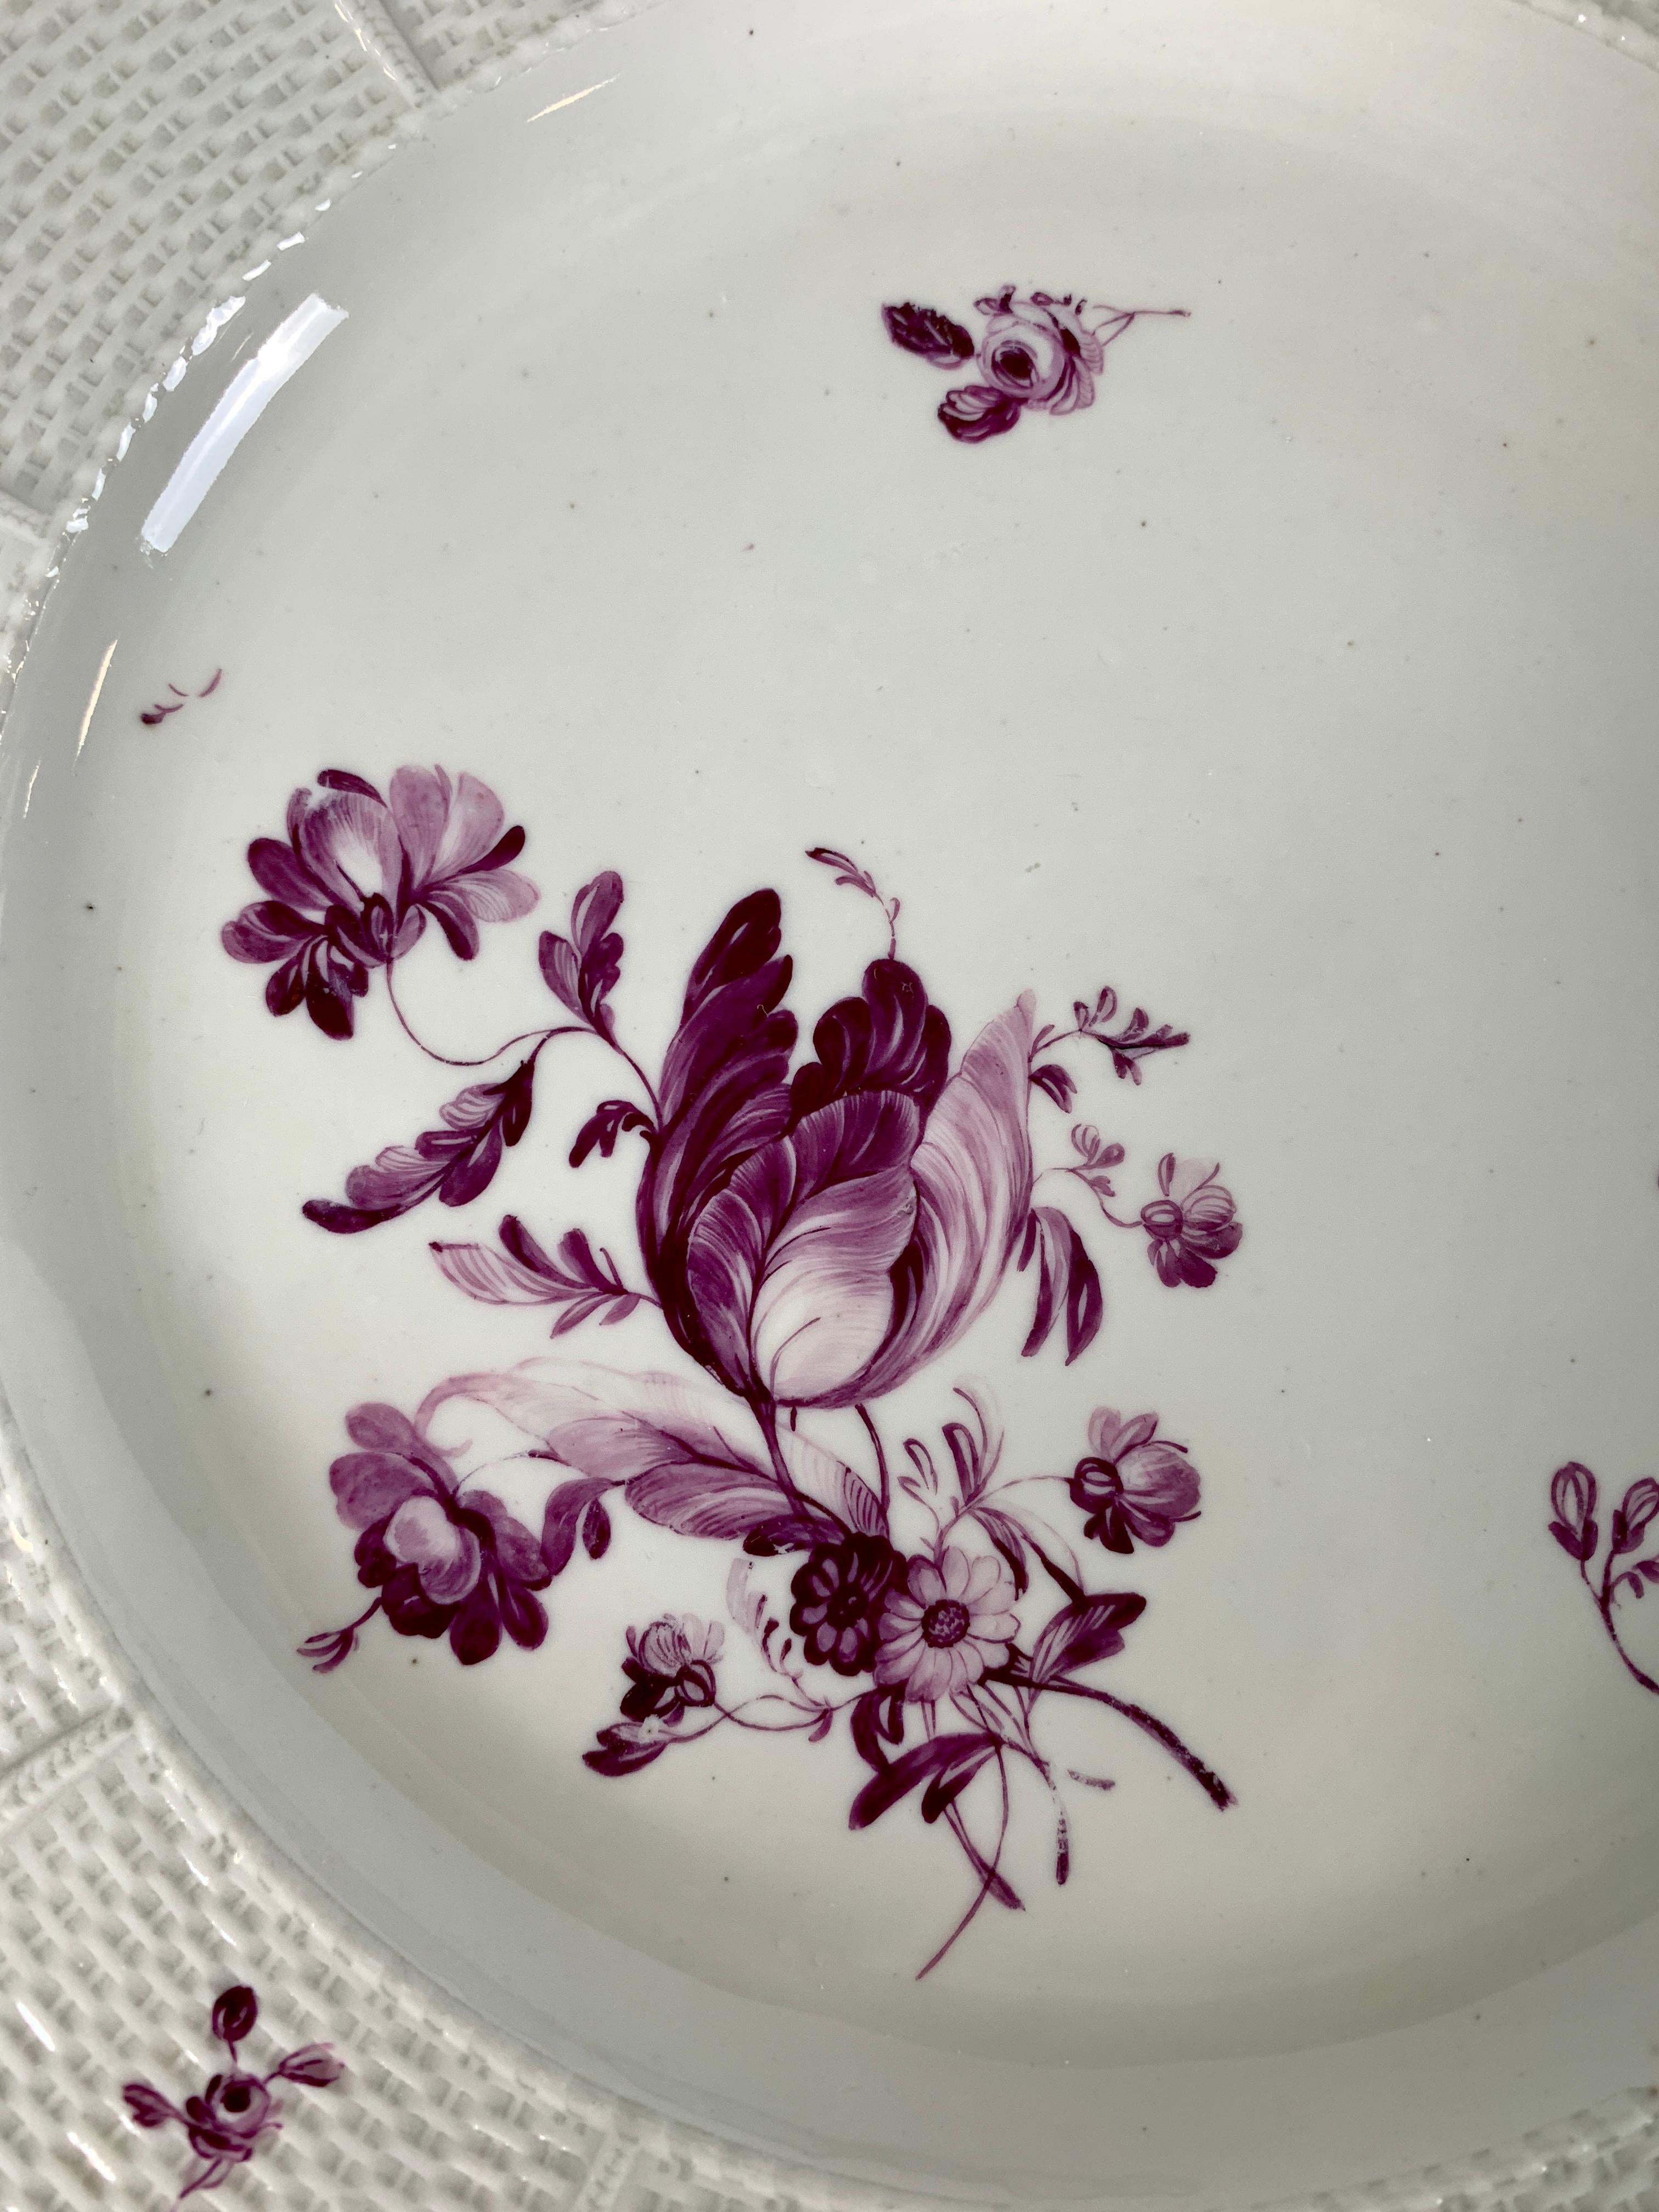 Provenance: The Private Collection of Mario Buatta
Mario loved flowers, and he loved beautifully painted flowers on porcelain.
This pair of Ludwigsburg dishes was made in Germany circa 1780. 
The wonderful quality of the hand painted flowers is